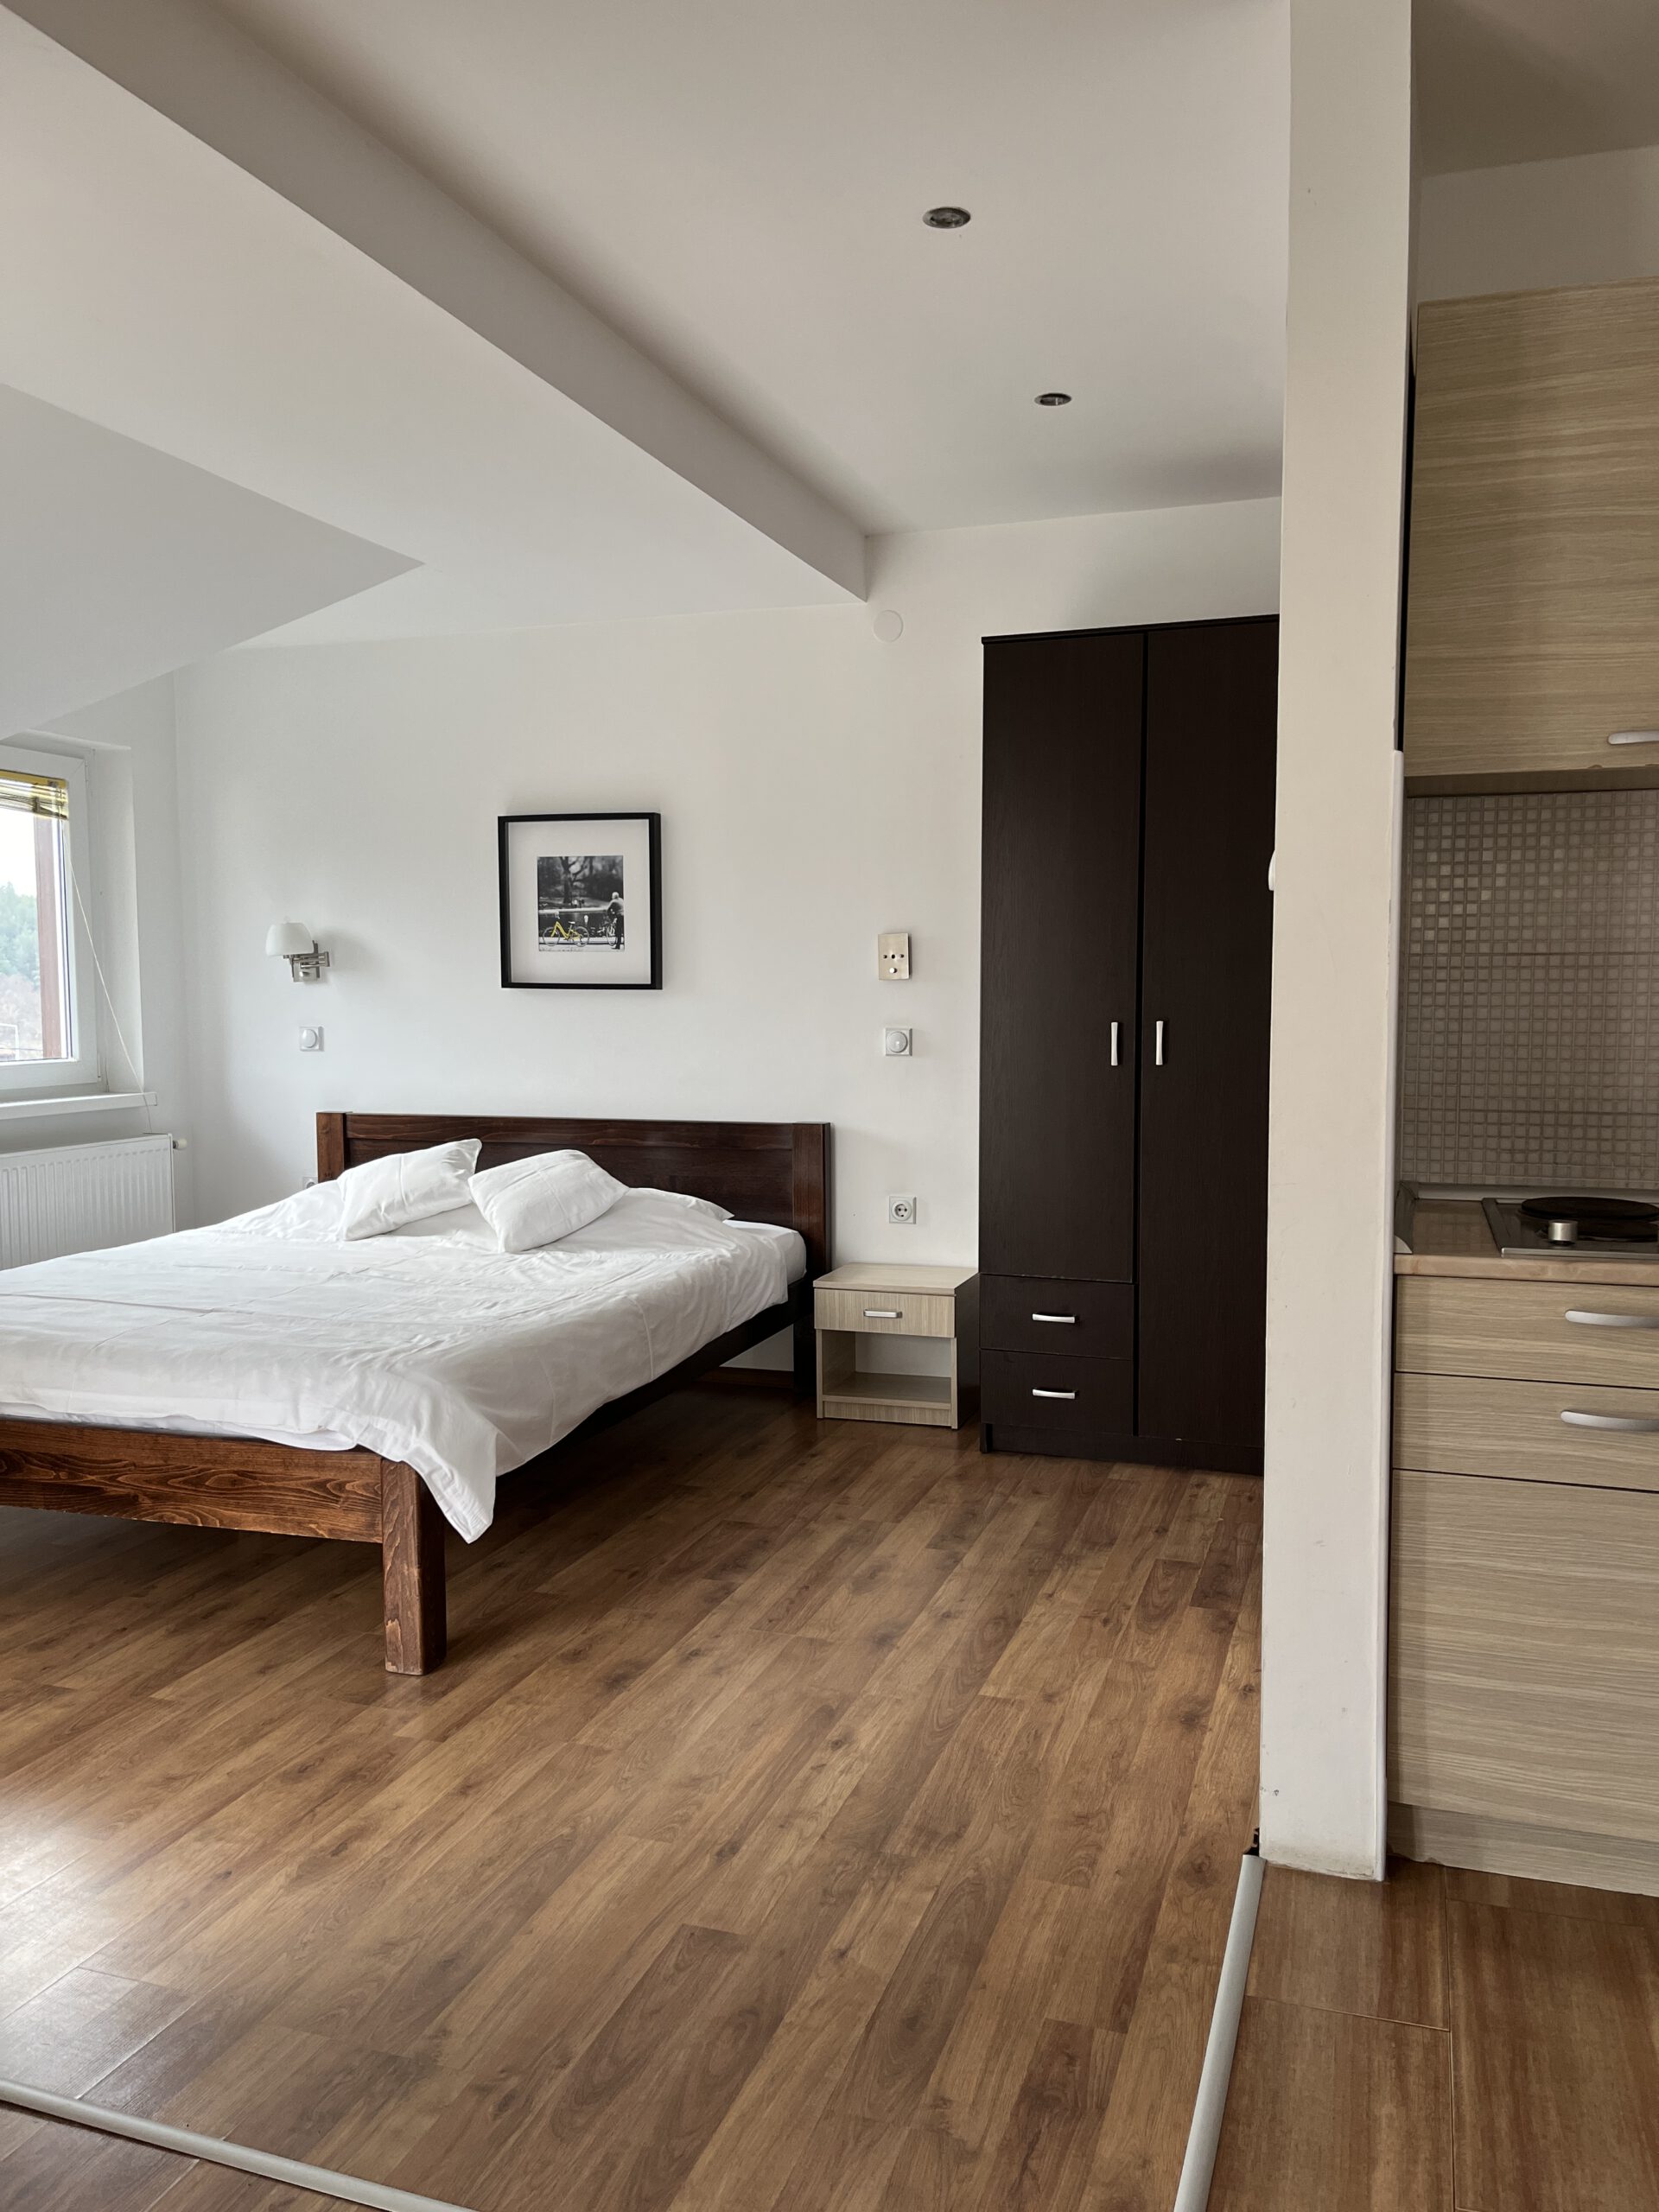 Image from the bedrooms in Hestia Apartments